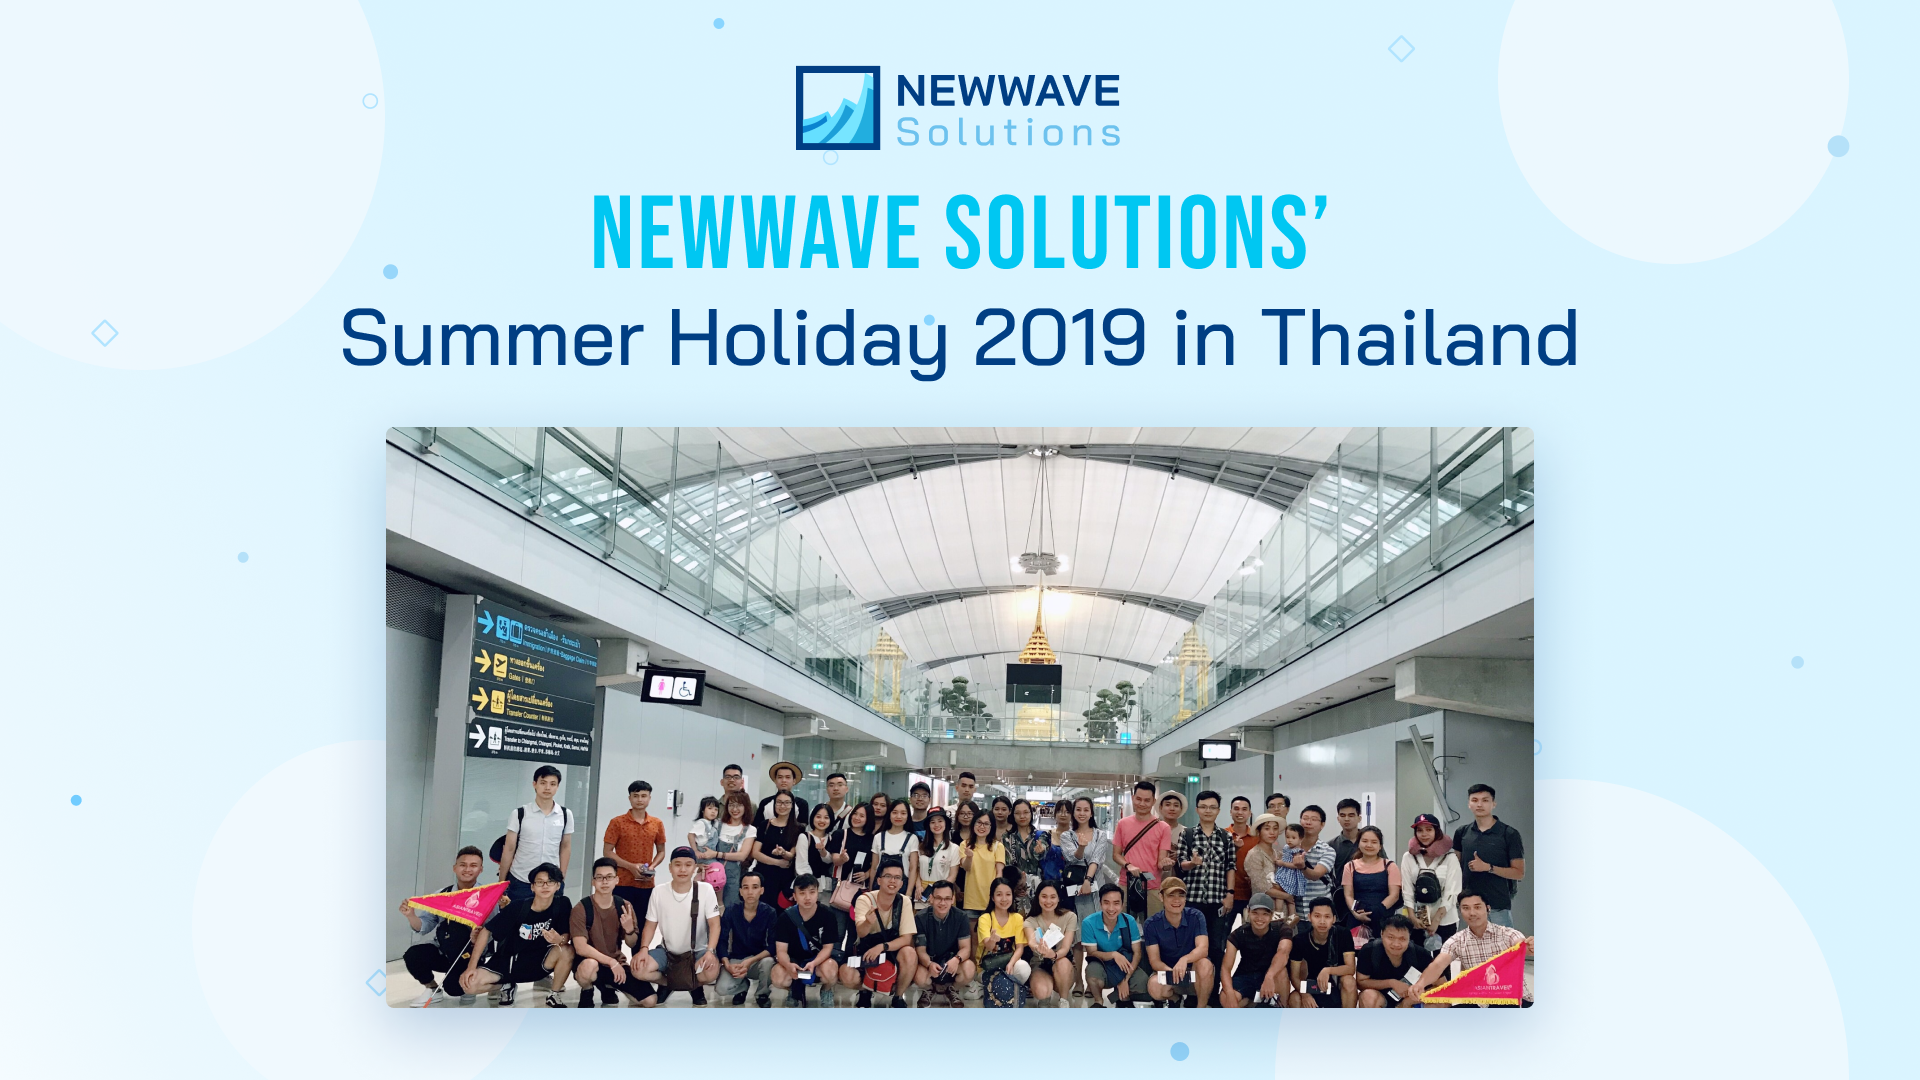 Newwave Solutions' Summer Holiday 2019 in Thailand